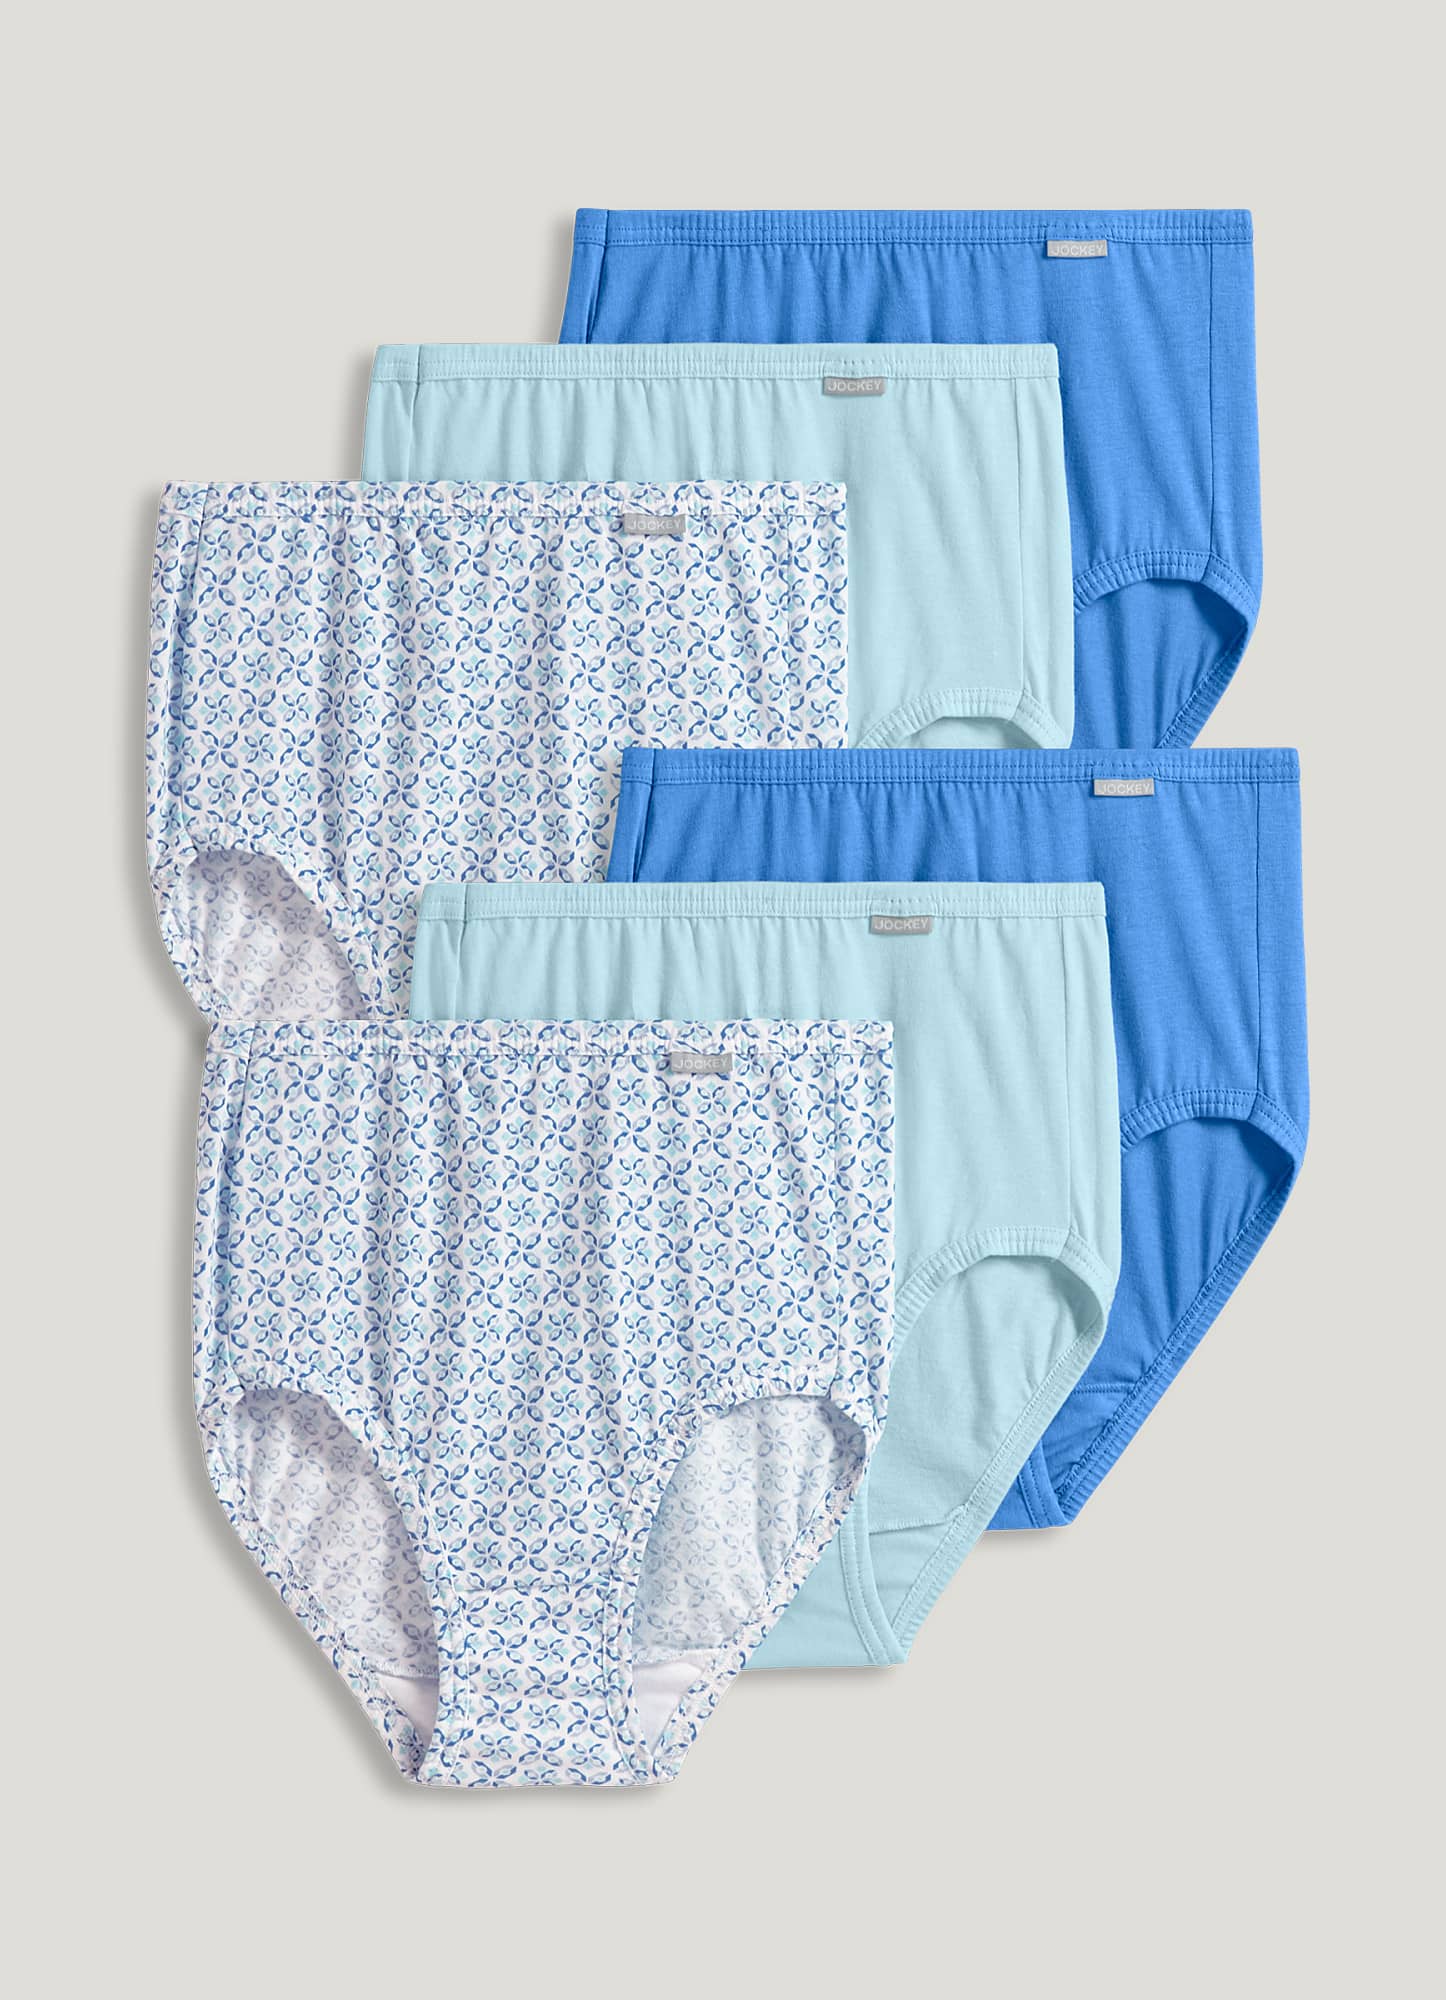 Plus Size Women's Cotton Brief 5-Pack by Comfort Choice in Polka